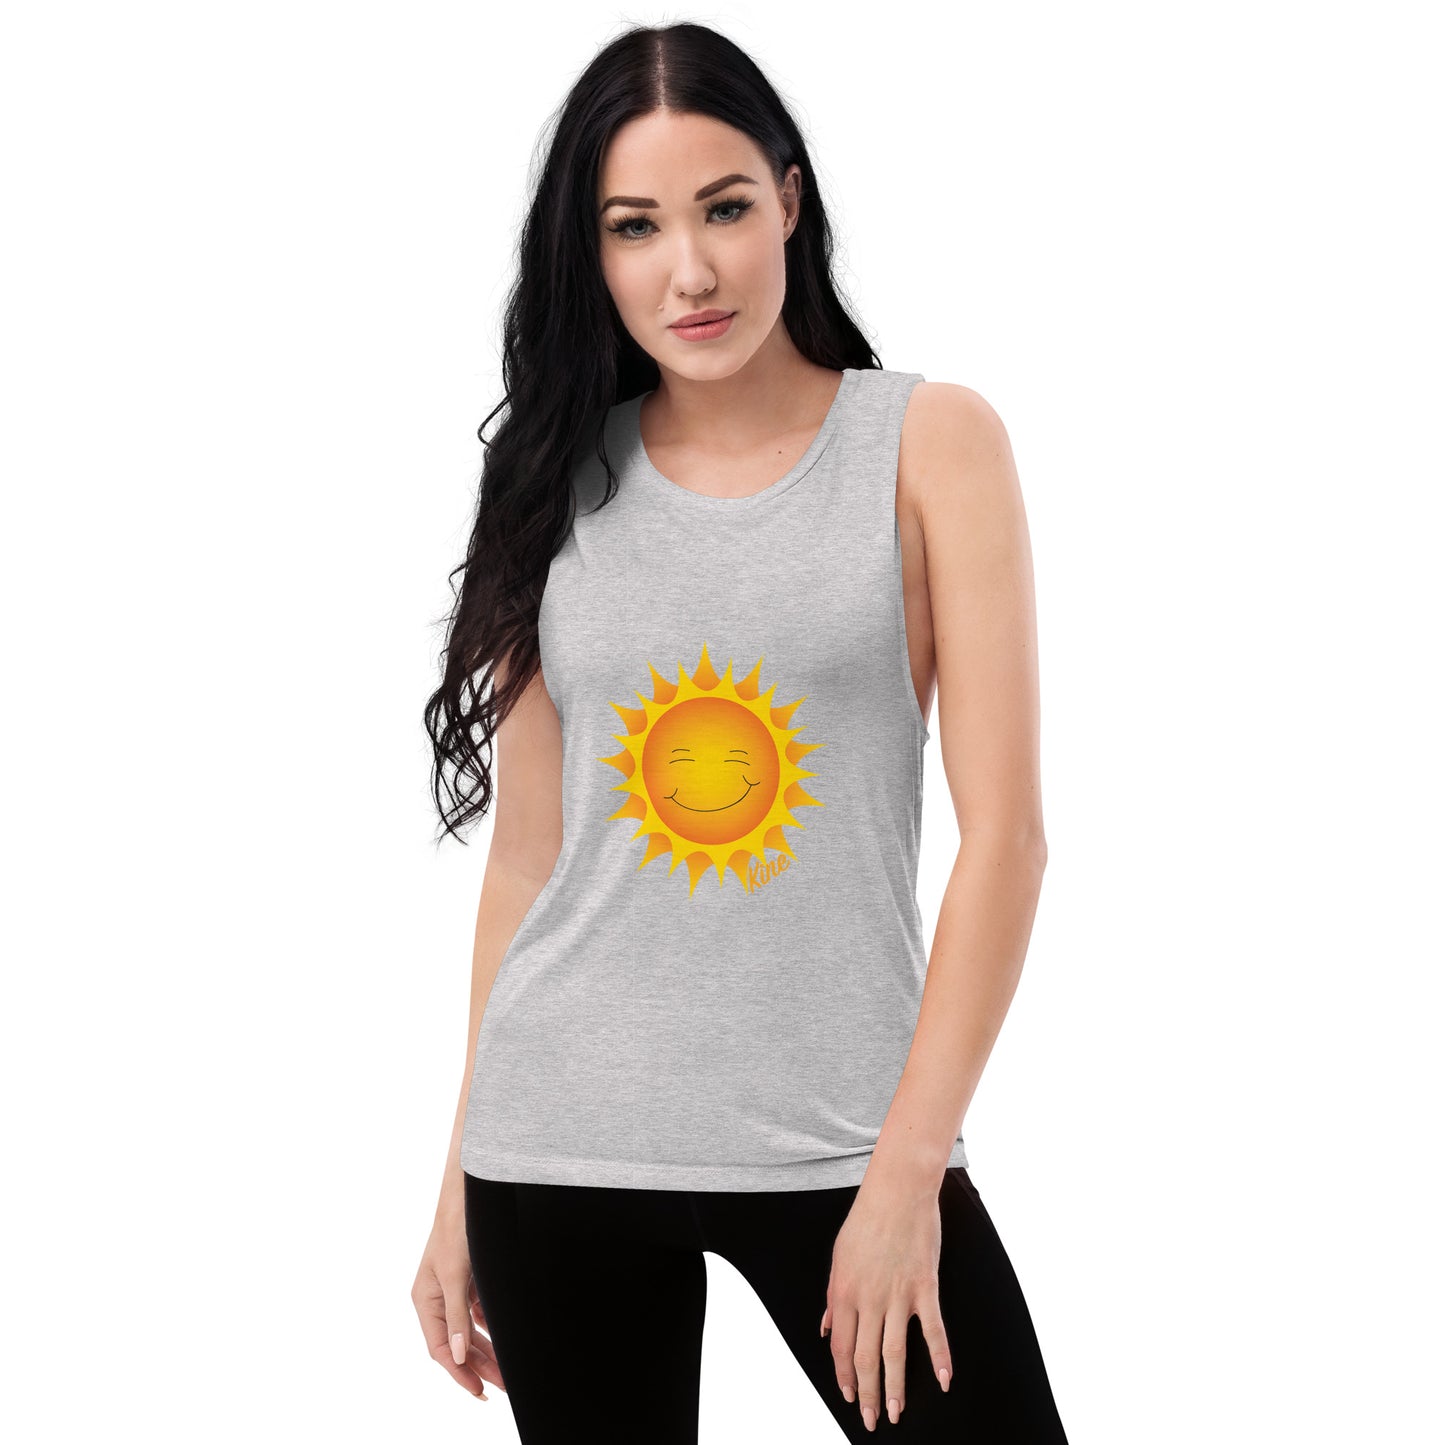 NEW LOGO LAUNCH!! Ladies’ Muscle Tank